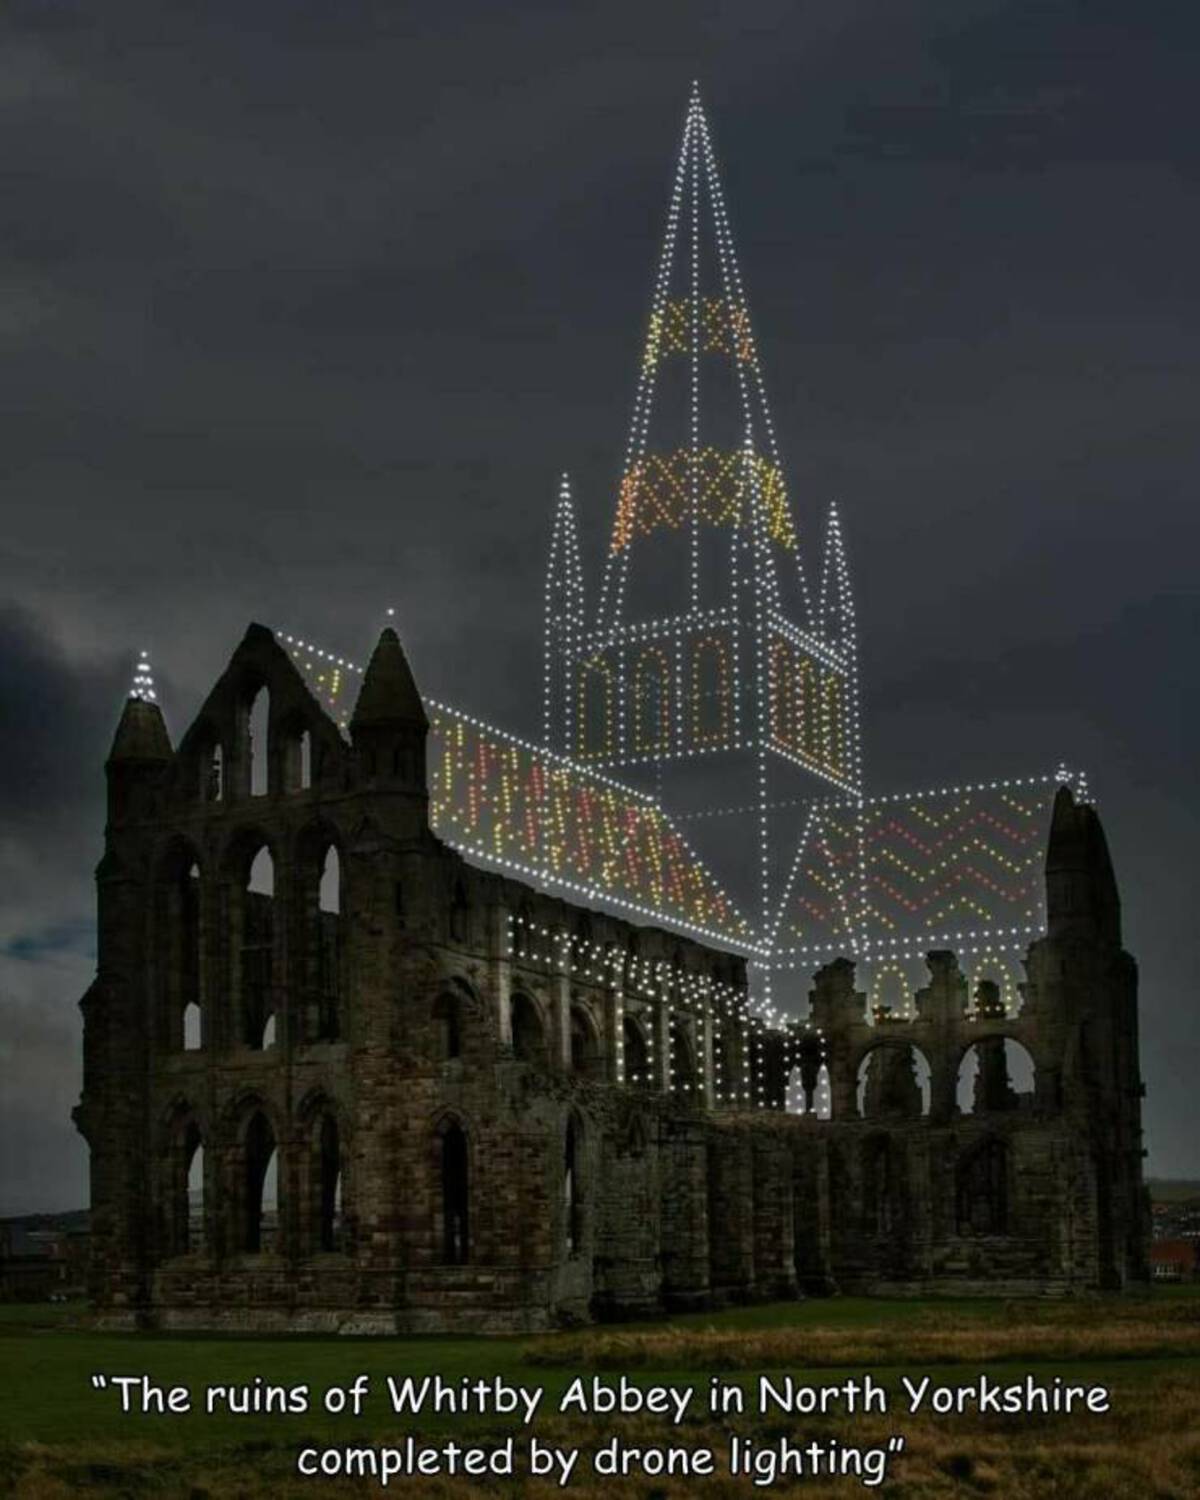 whitby abbey - Aa "The ruins of Whitby Abbey in North Yorkshire completed by drone lighting"